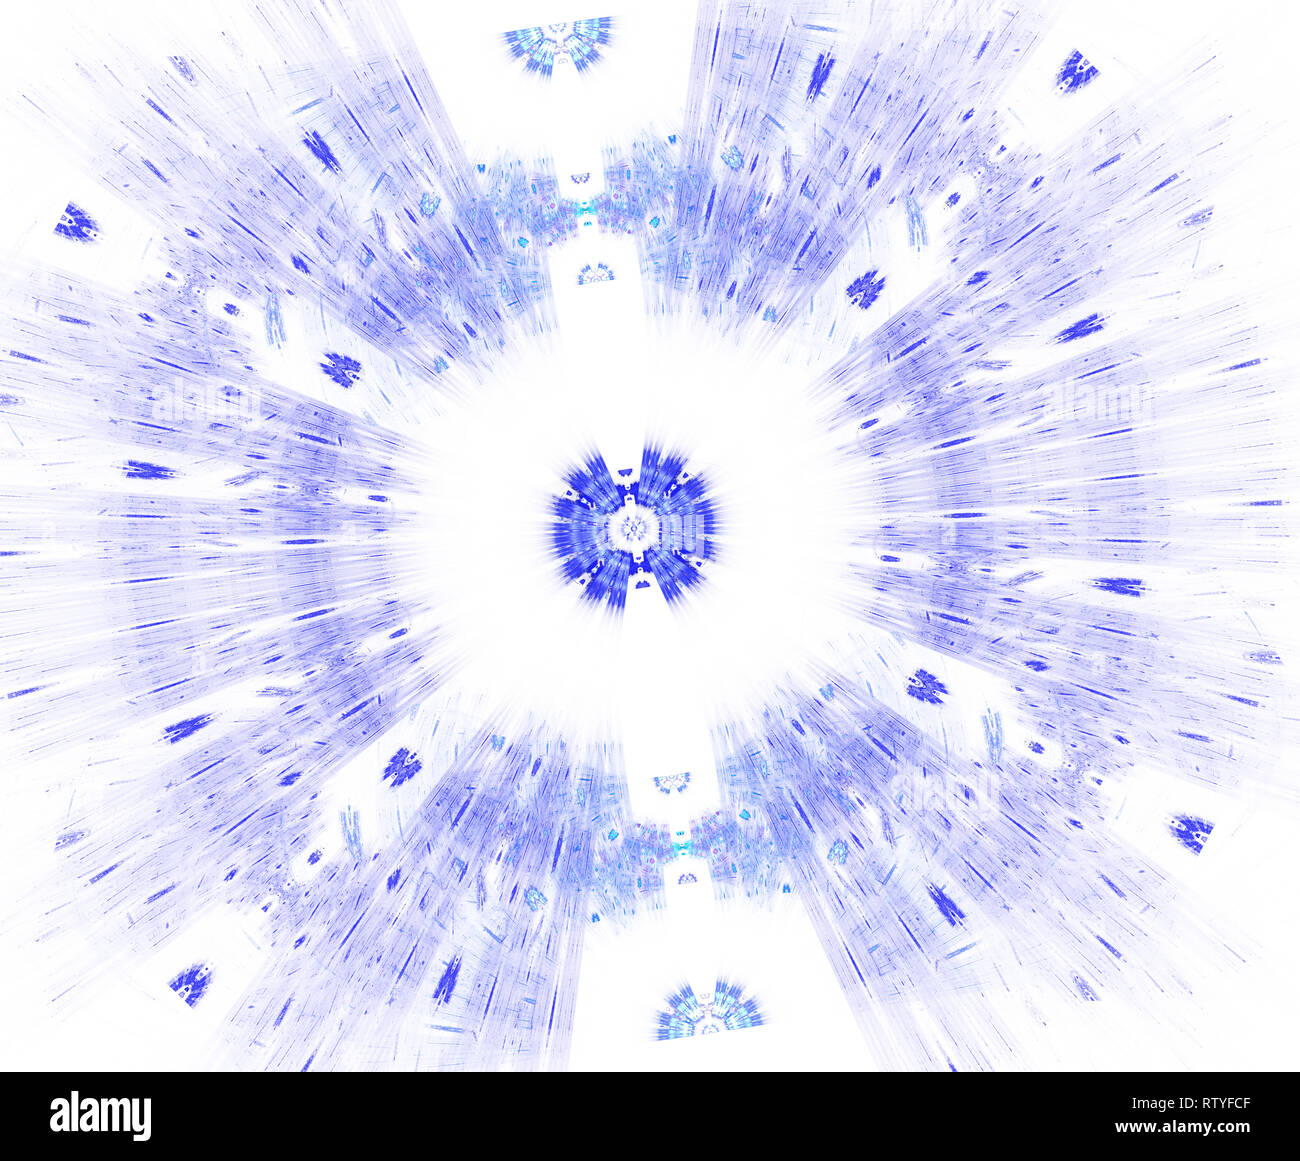 Glowing stargate with particles in space. Abstract fractal background. A large file showing many details when viewed at full size Stock Photo